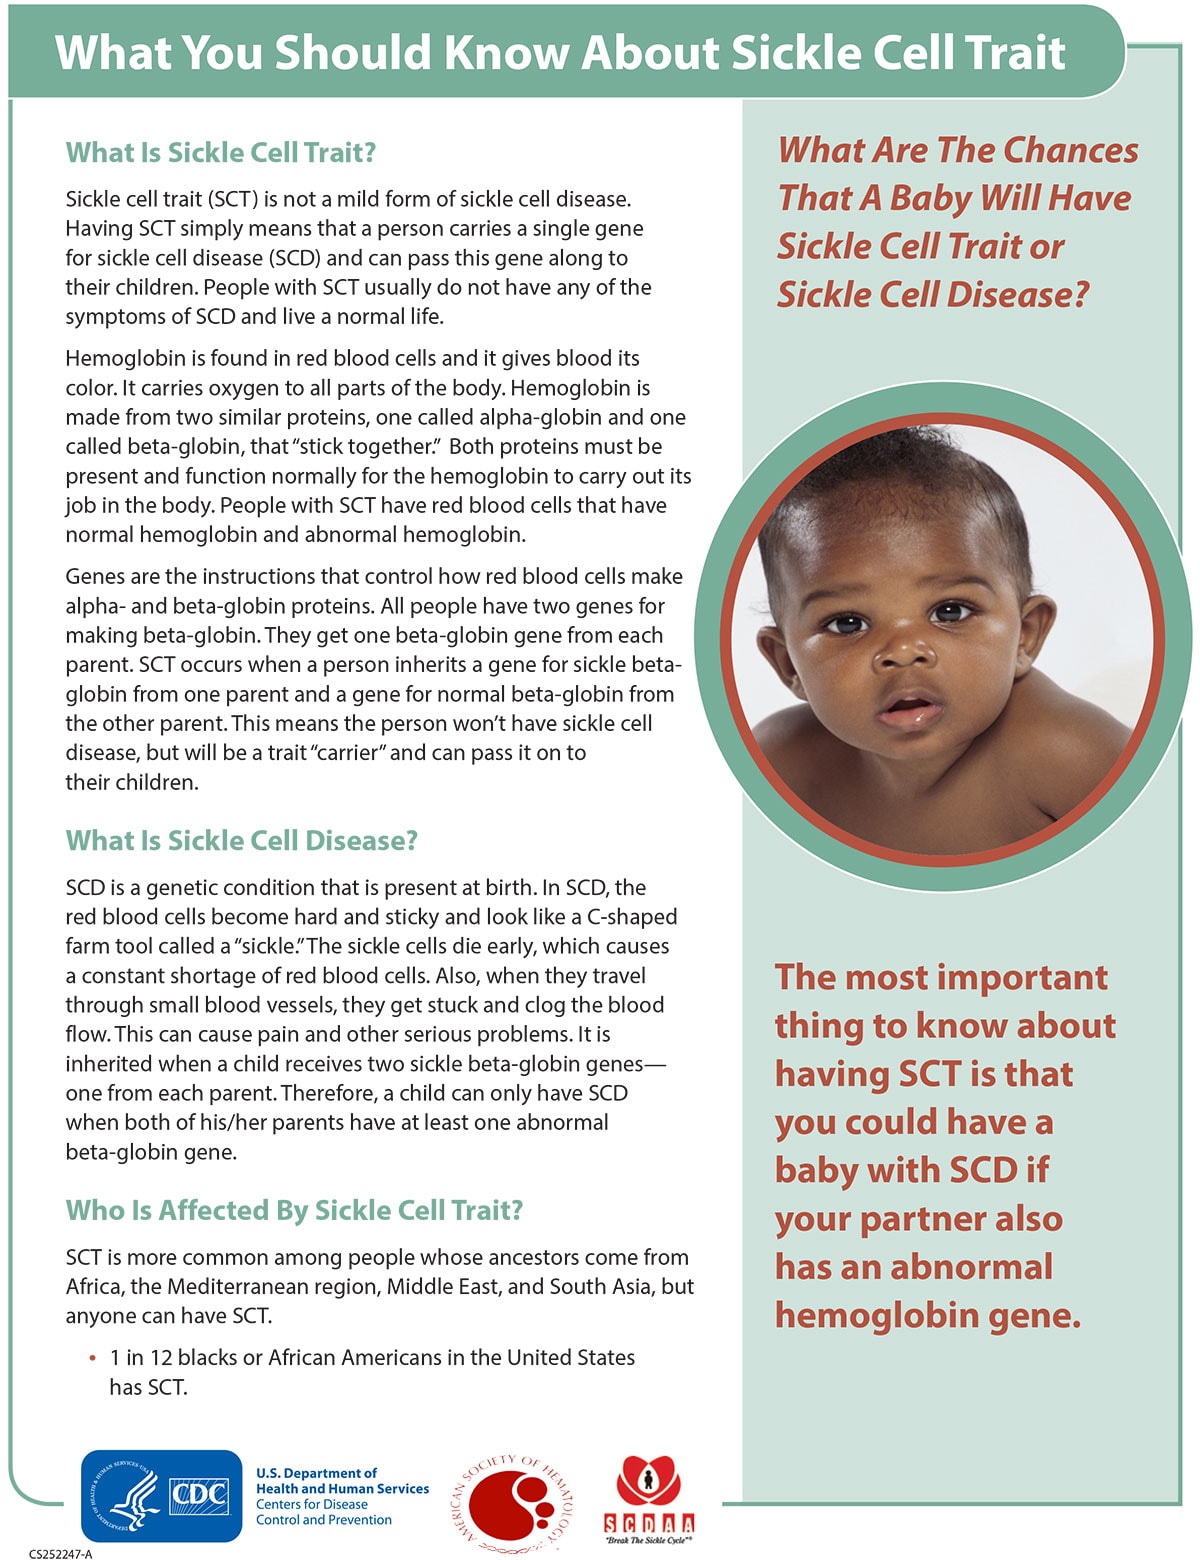 What You Should Know About Sickle Cell Trait factsheet thumbnail